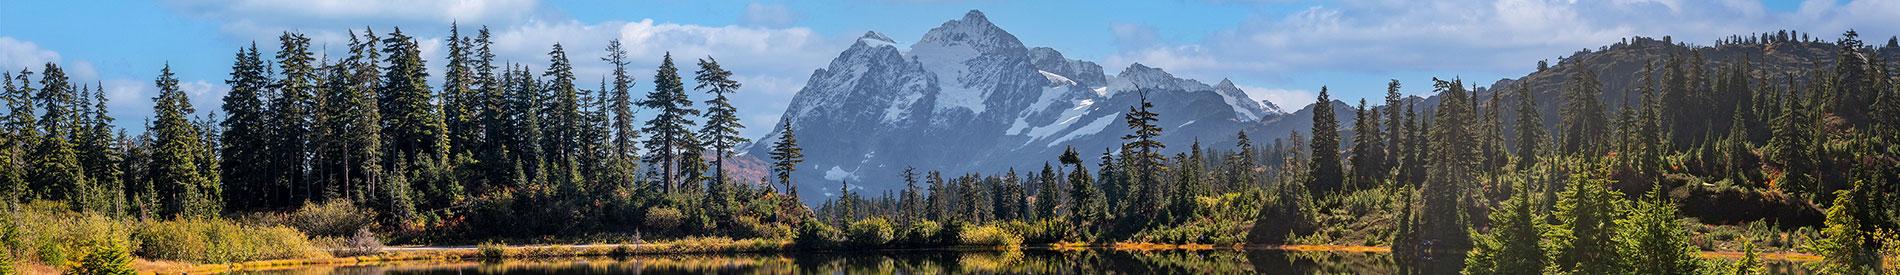 Picture Lake with Mt. Shuksan in the background